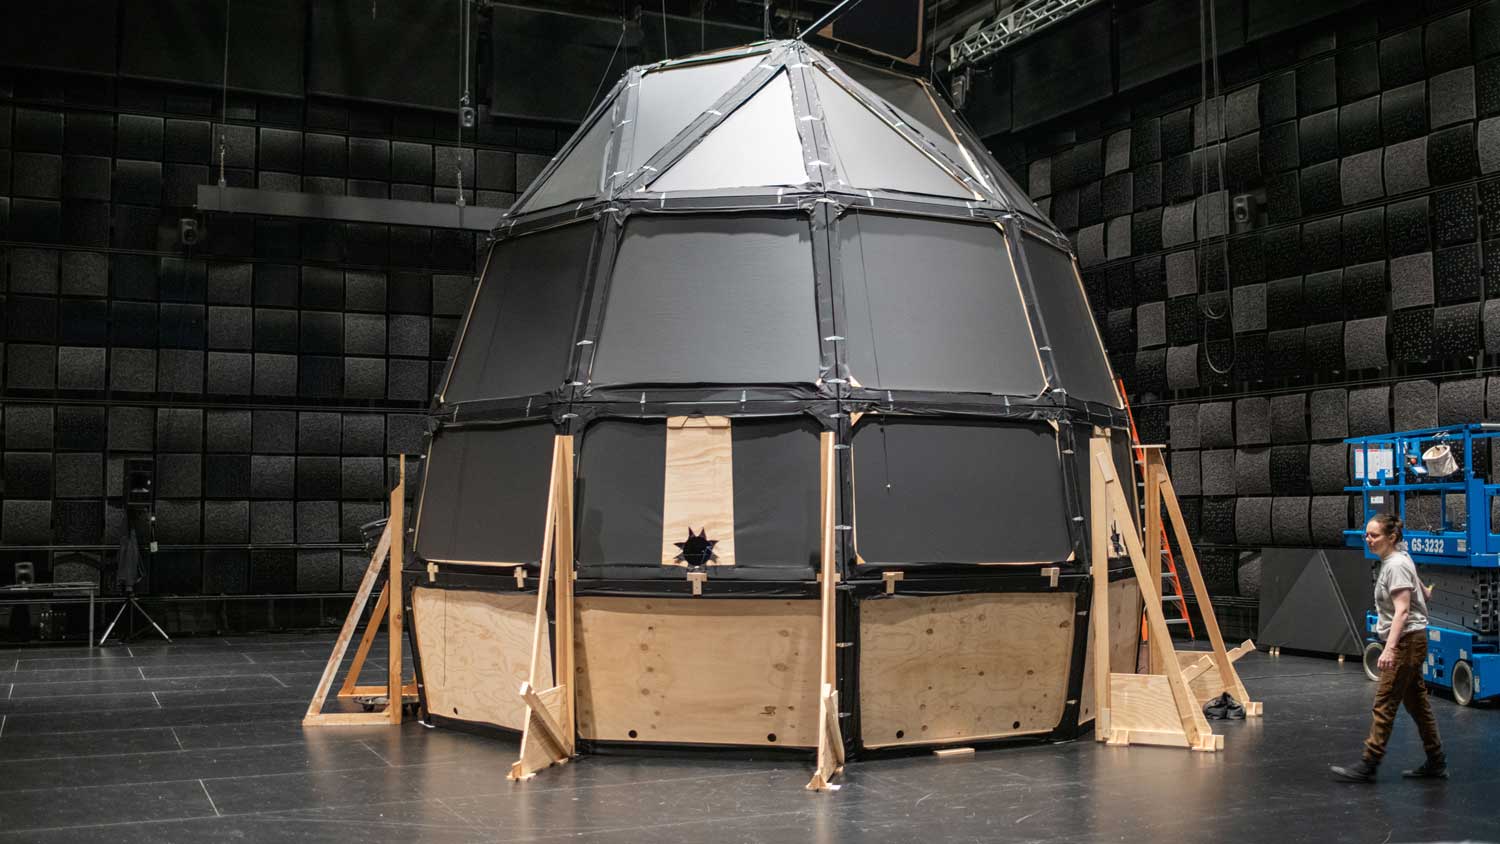 a spaceship-like structure covered in black fabric in studio1